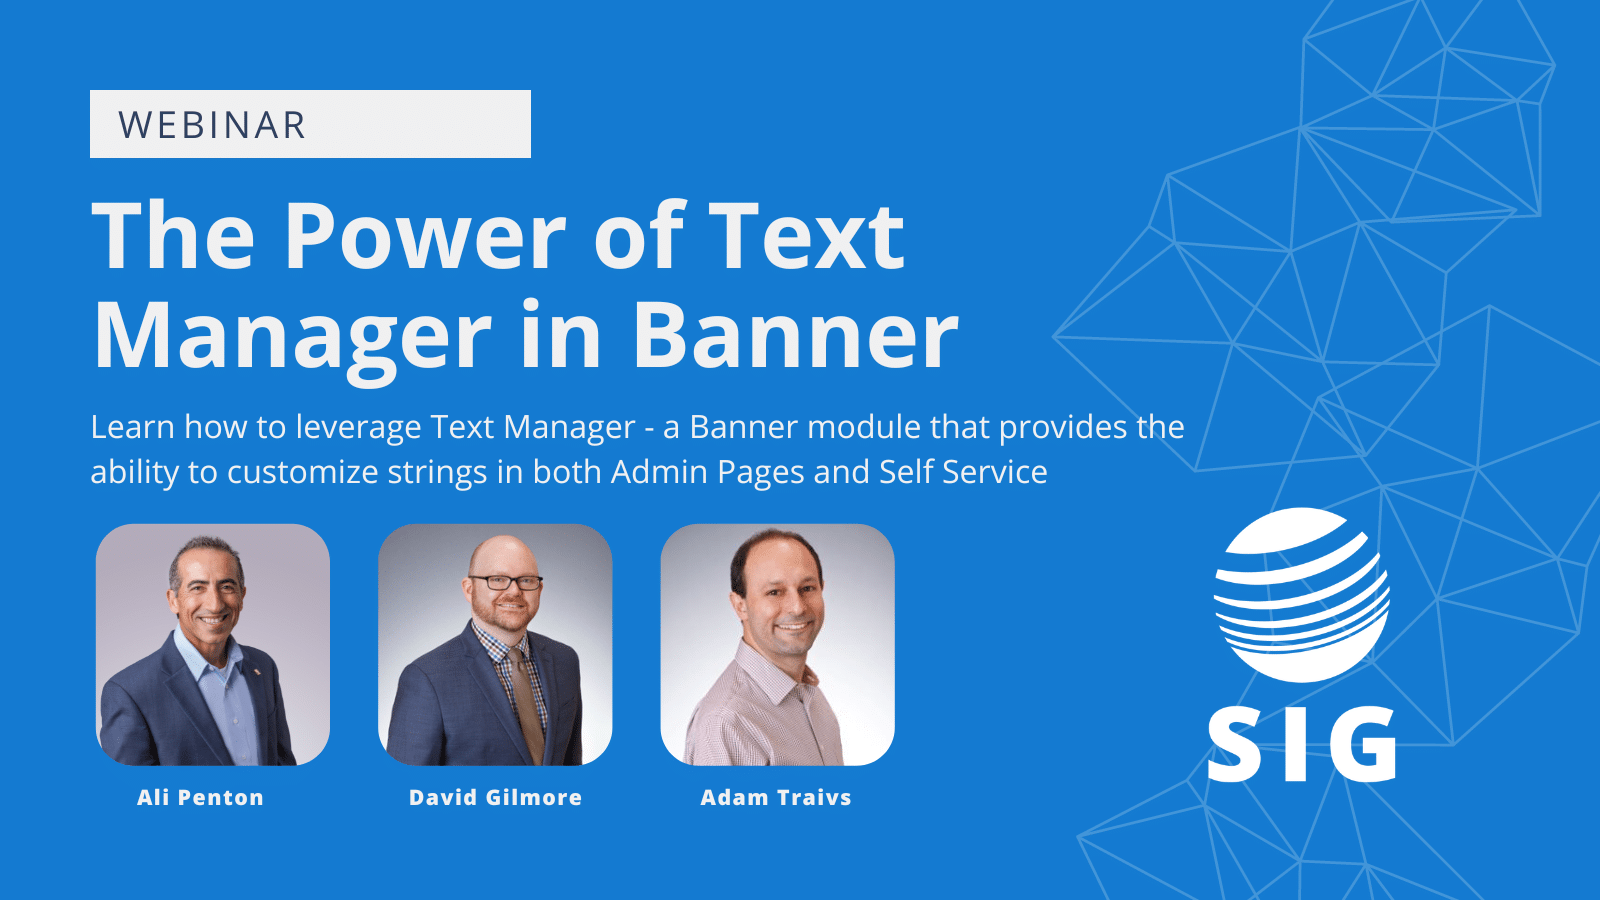 Webinar The Power of Text Manager in Banner